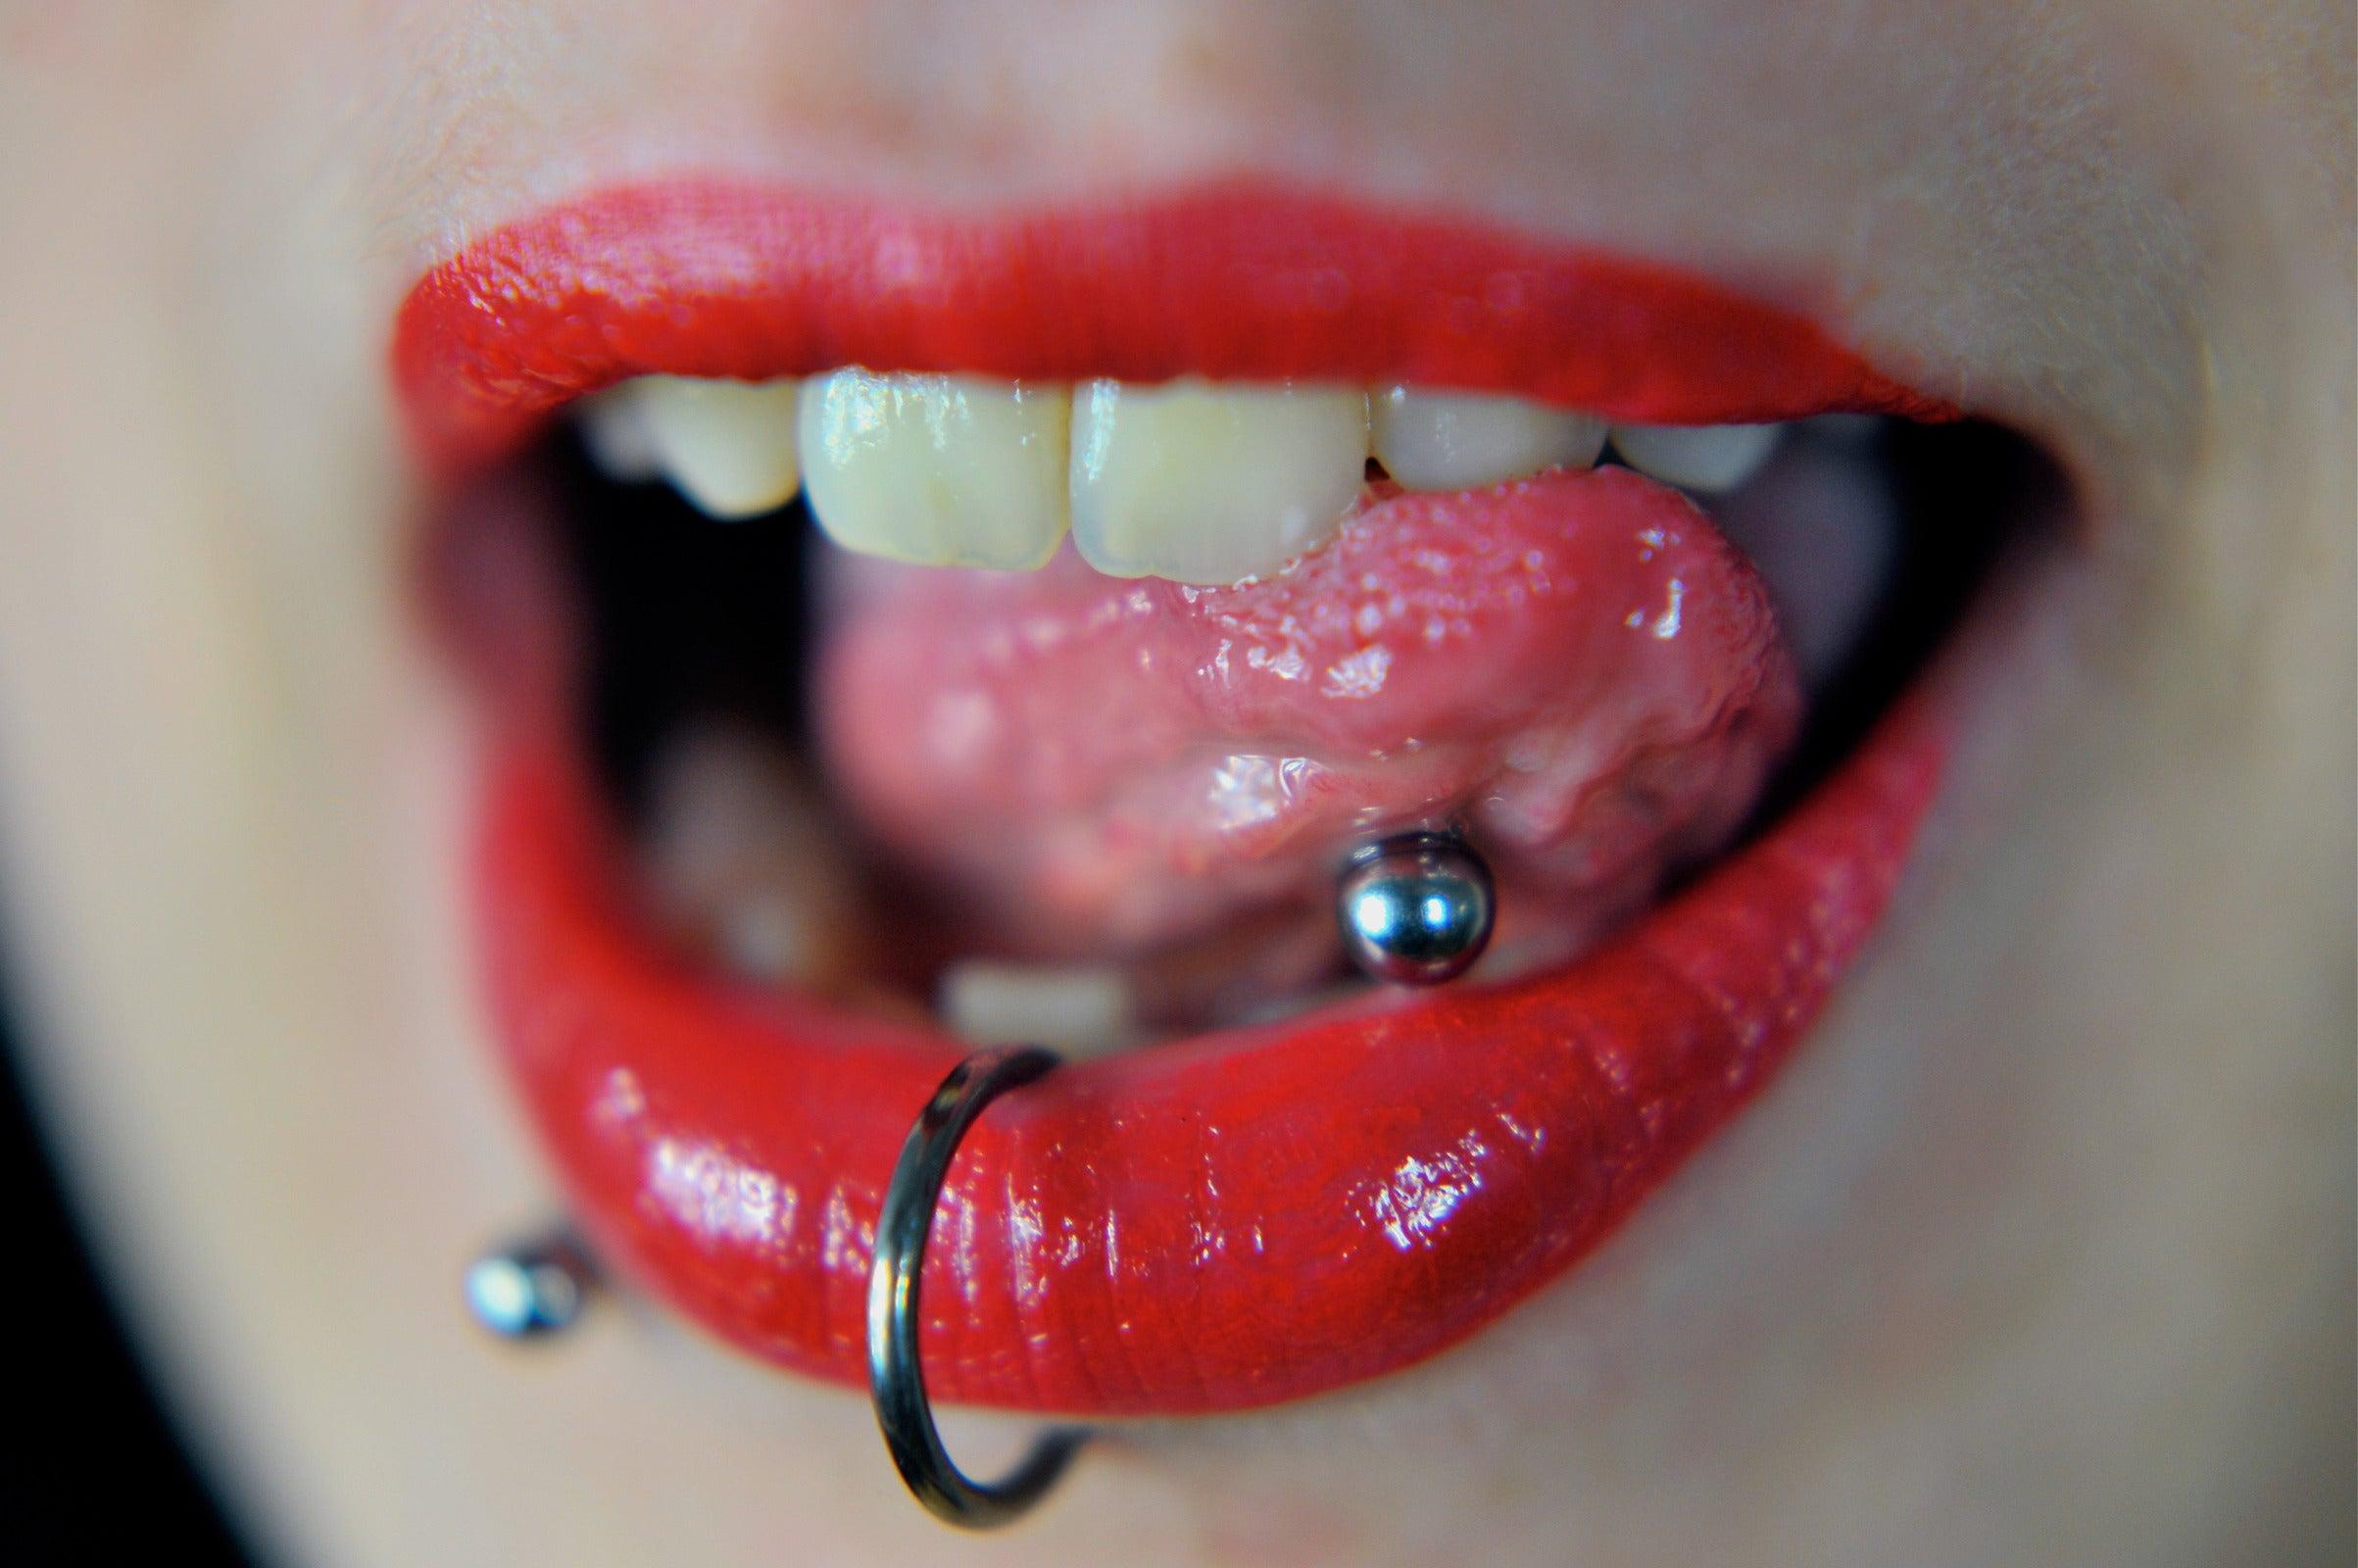 These 10 reasons explain why women get their tongues pierced